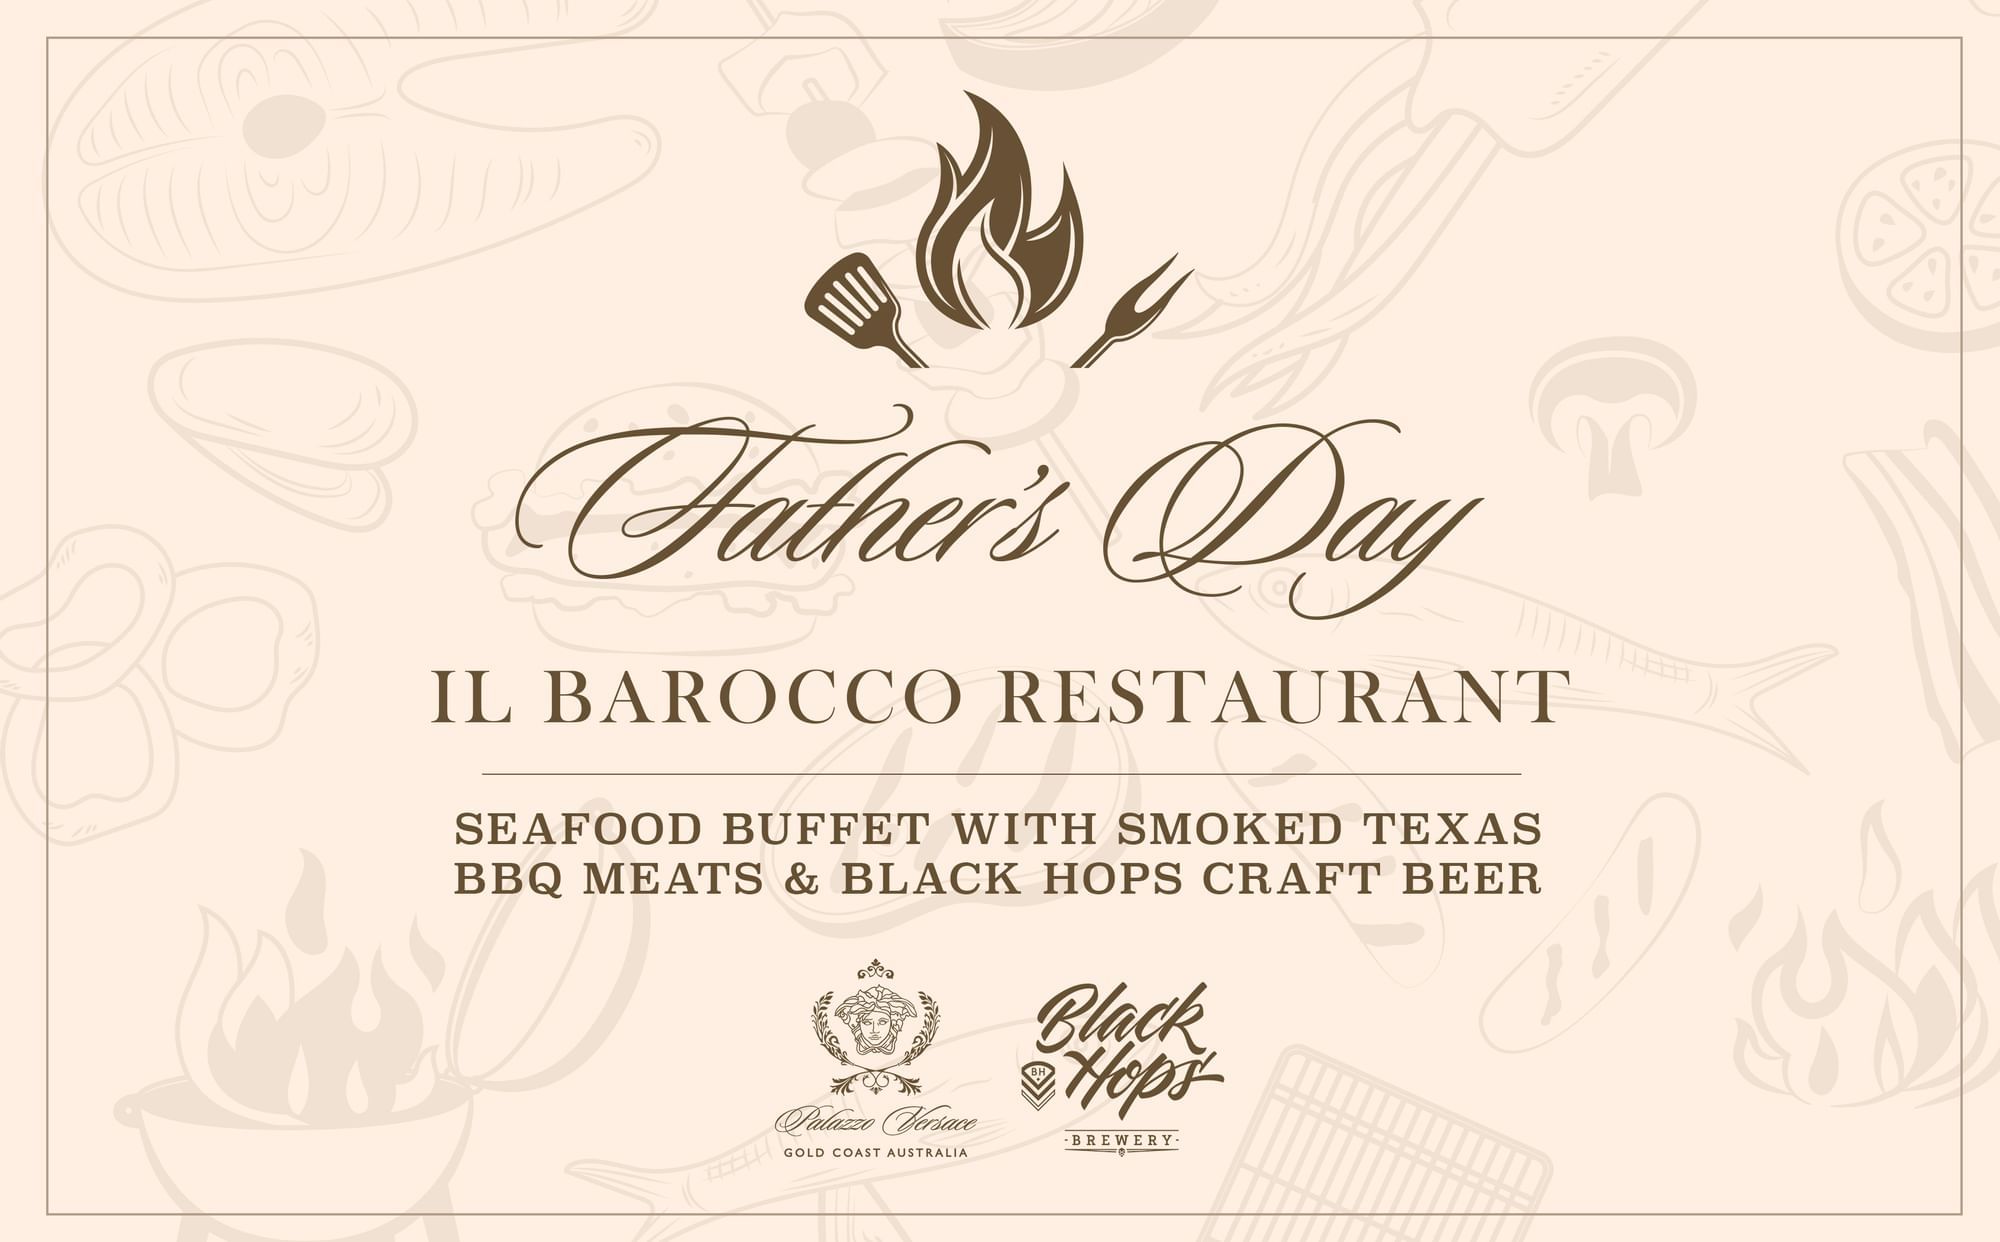 Father's Day Lunch in Il Barocco Restaurant